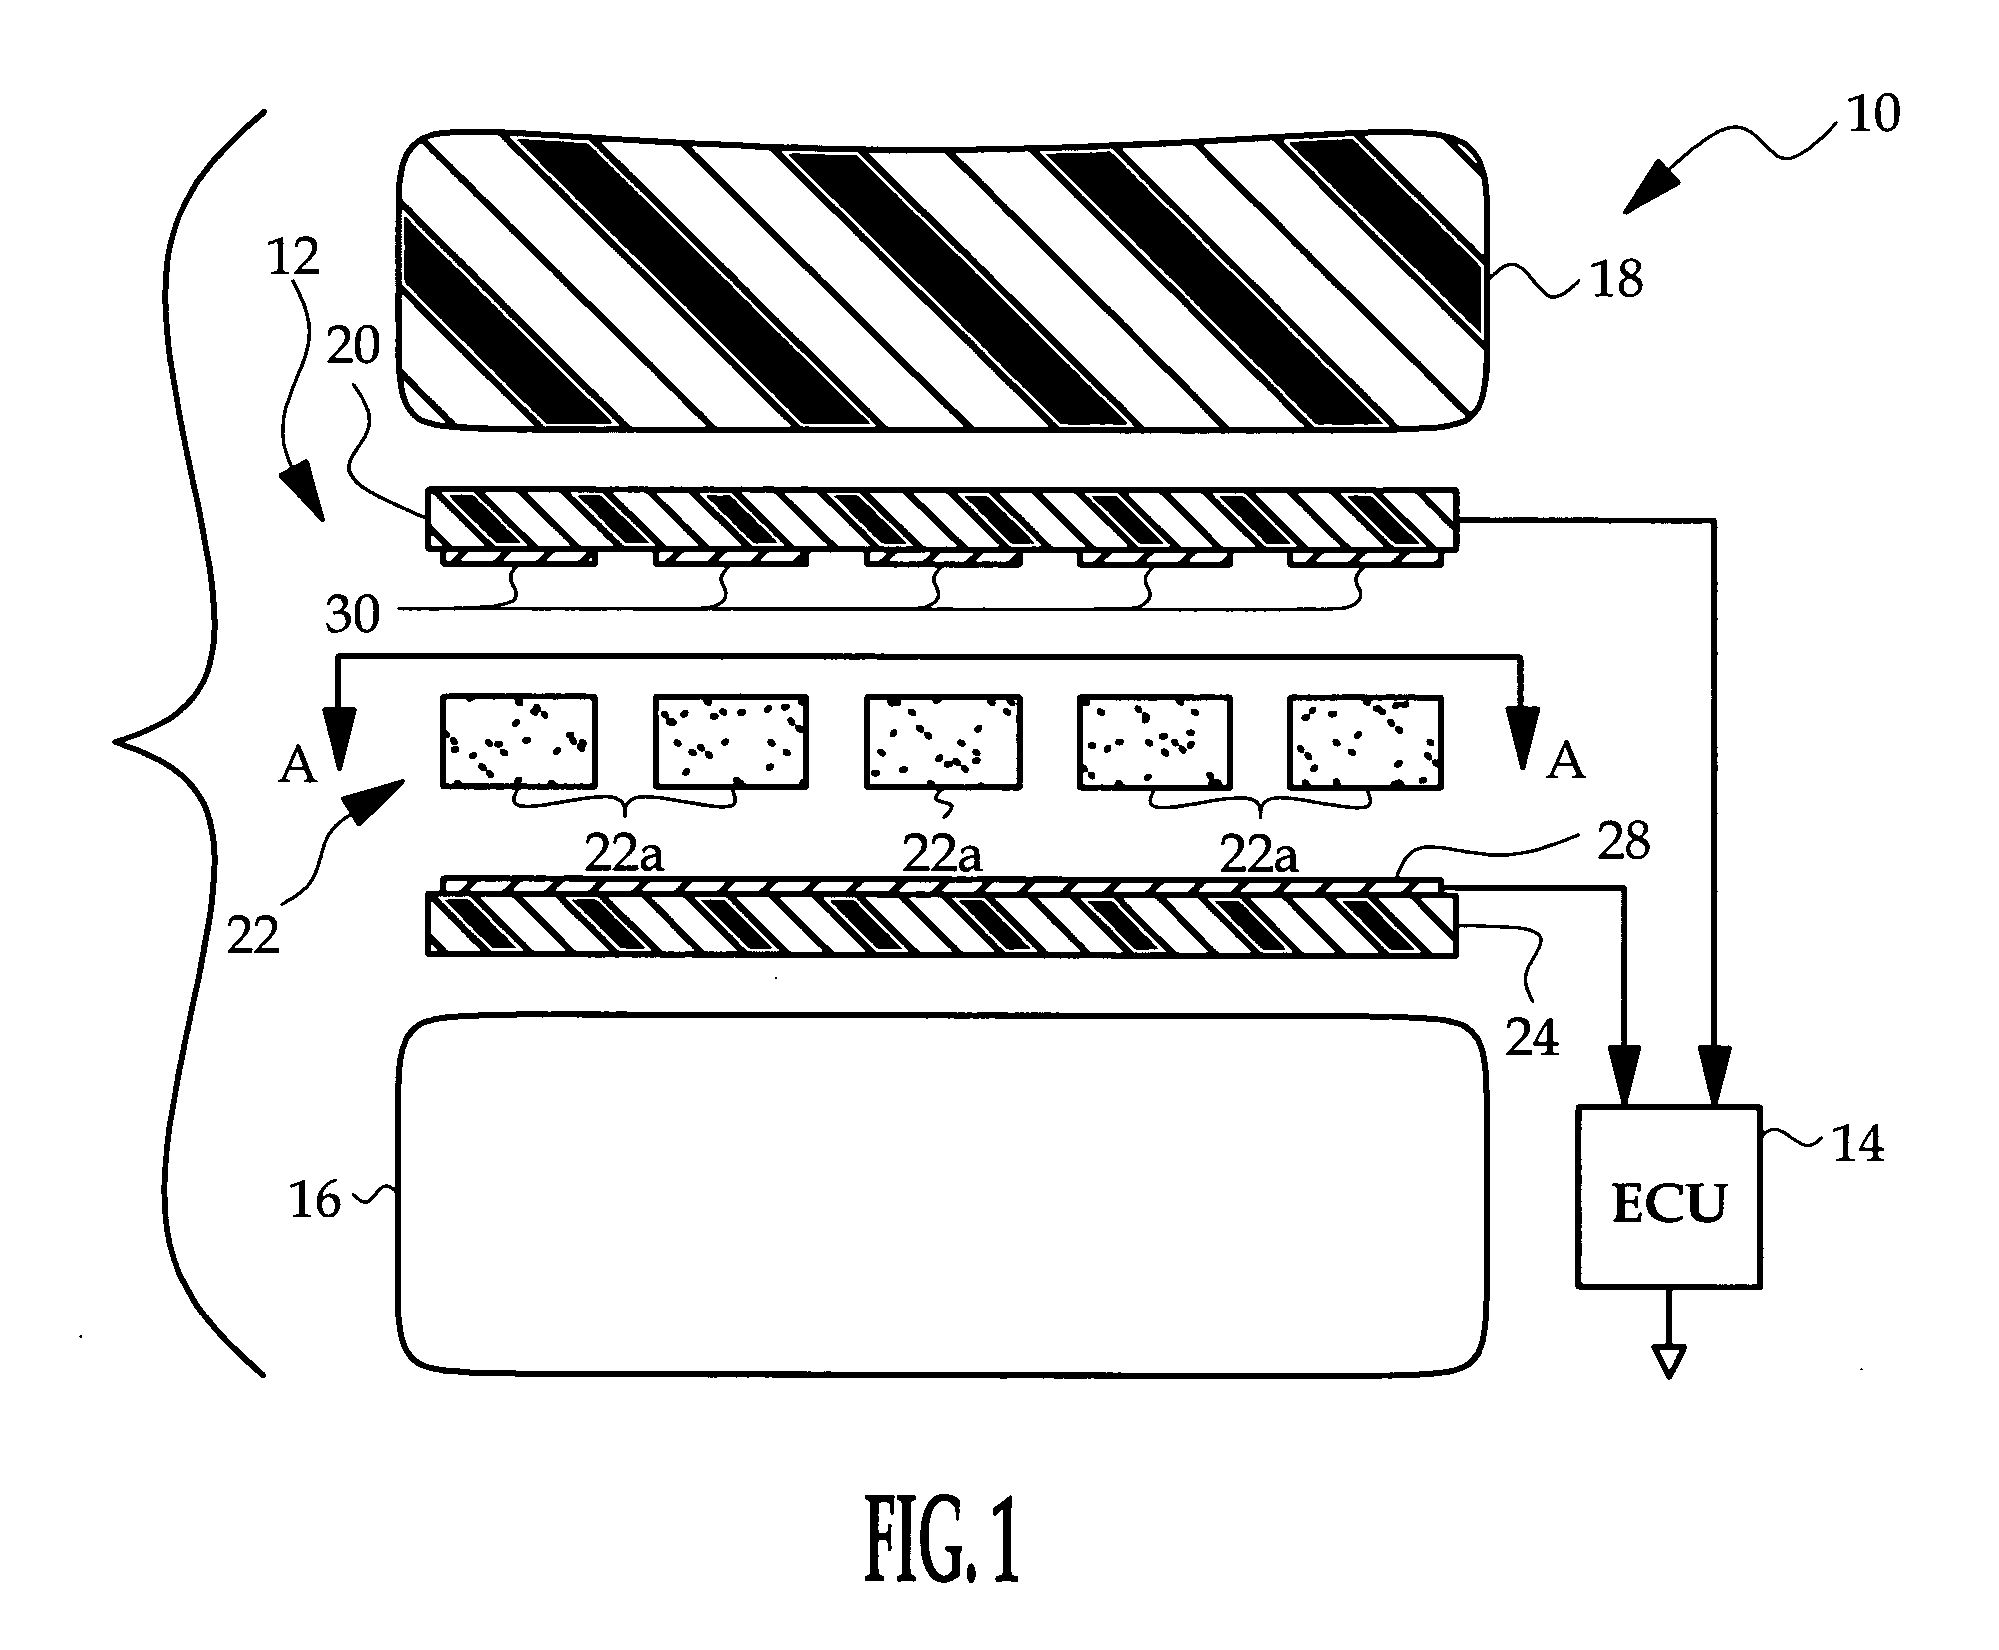 Capacitive load cell apparatus having silicone-impregnated foam dielectric pads